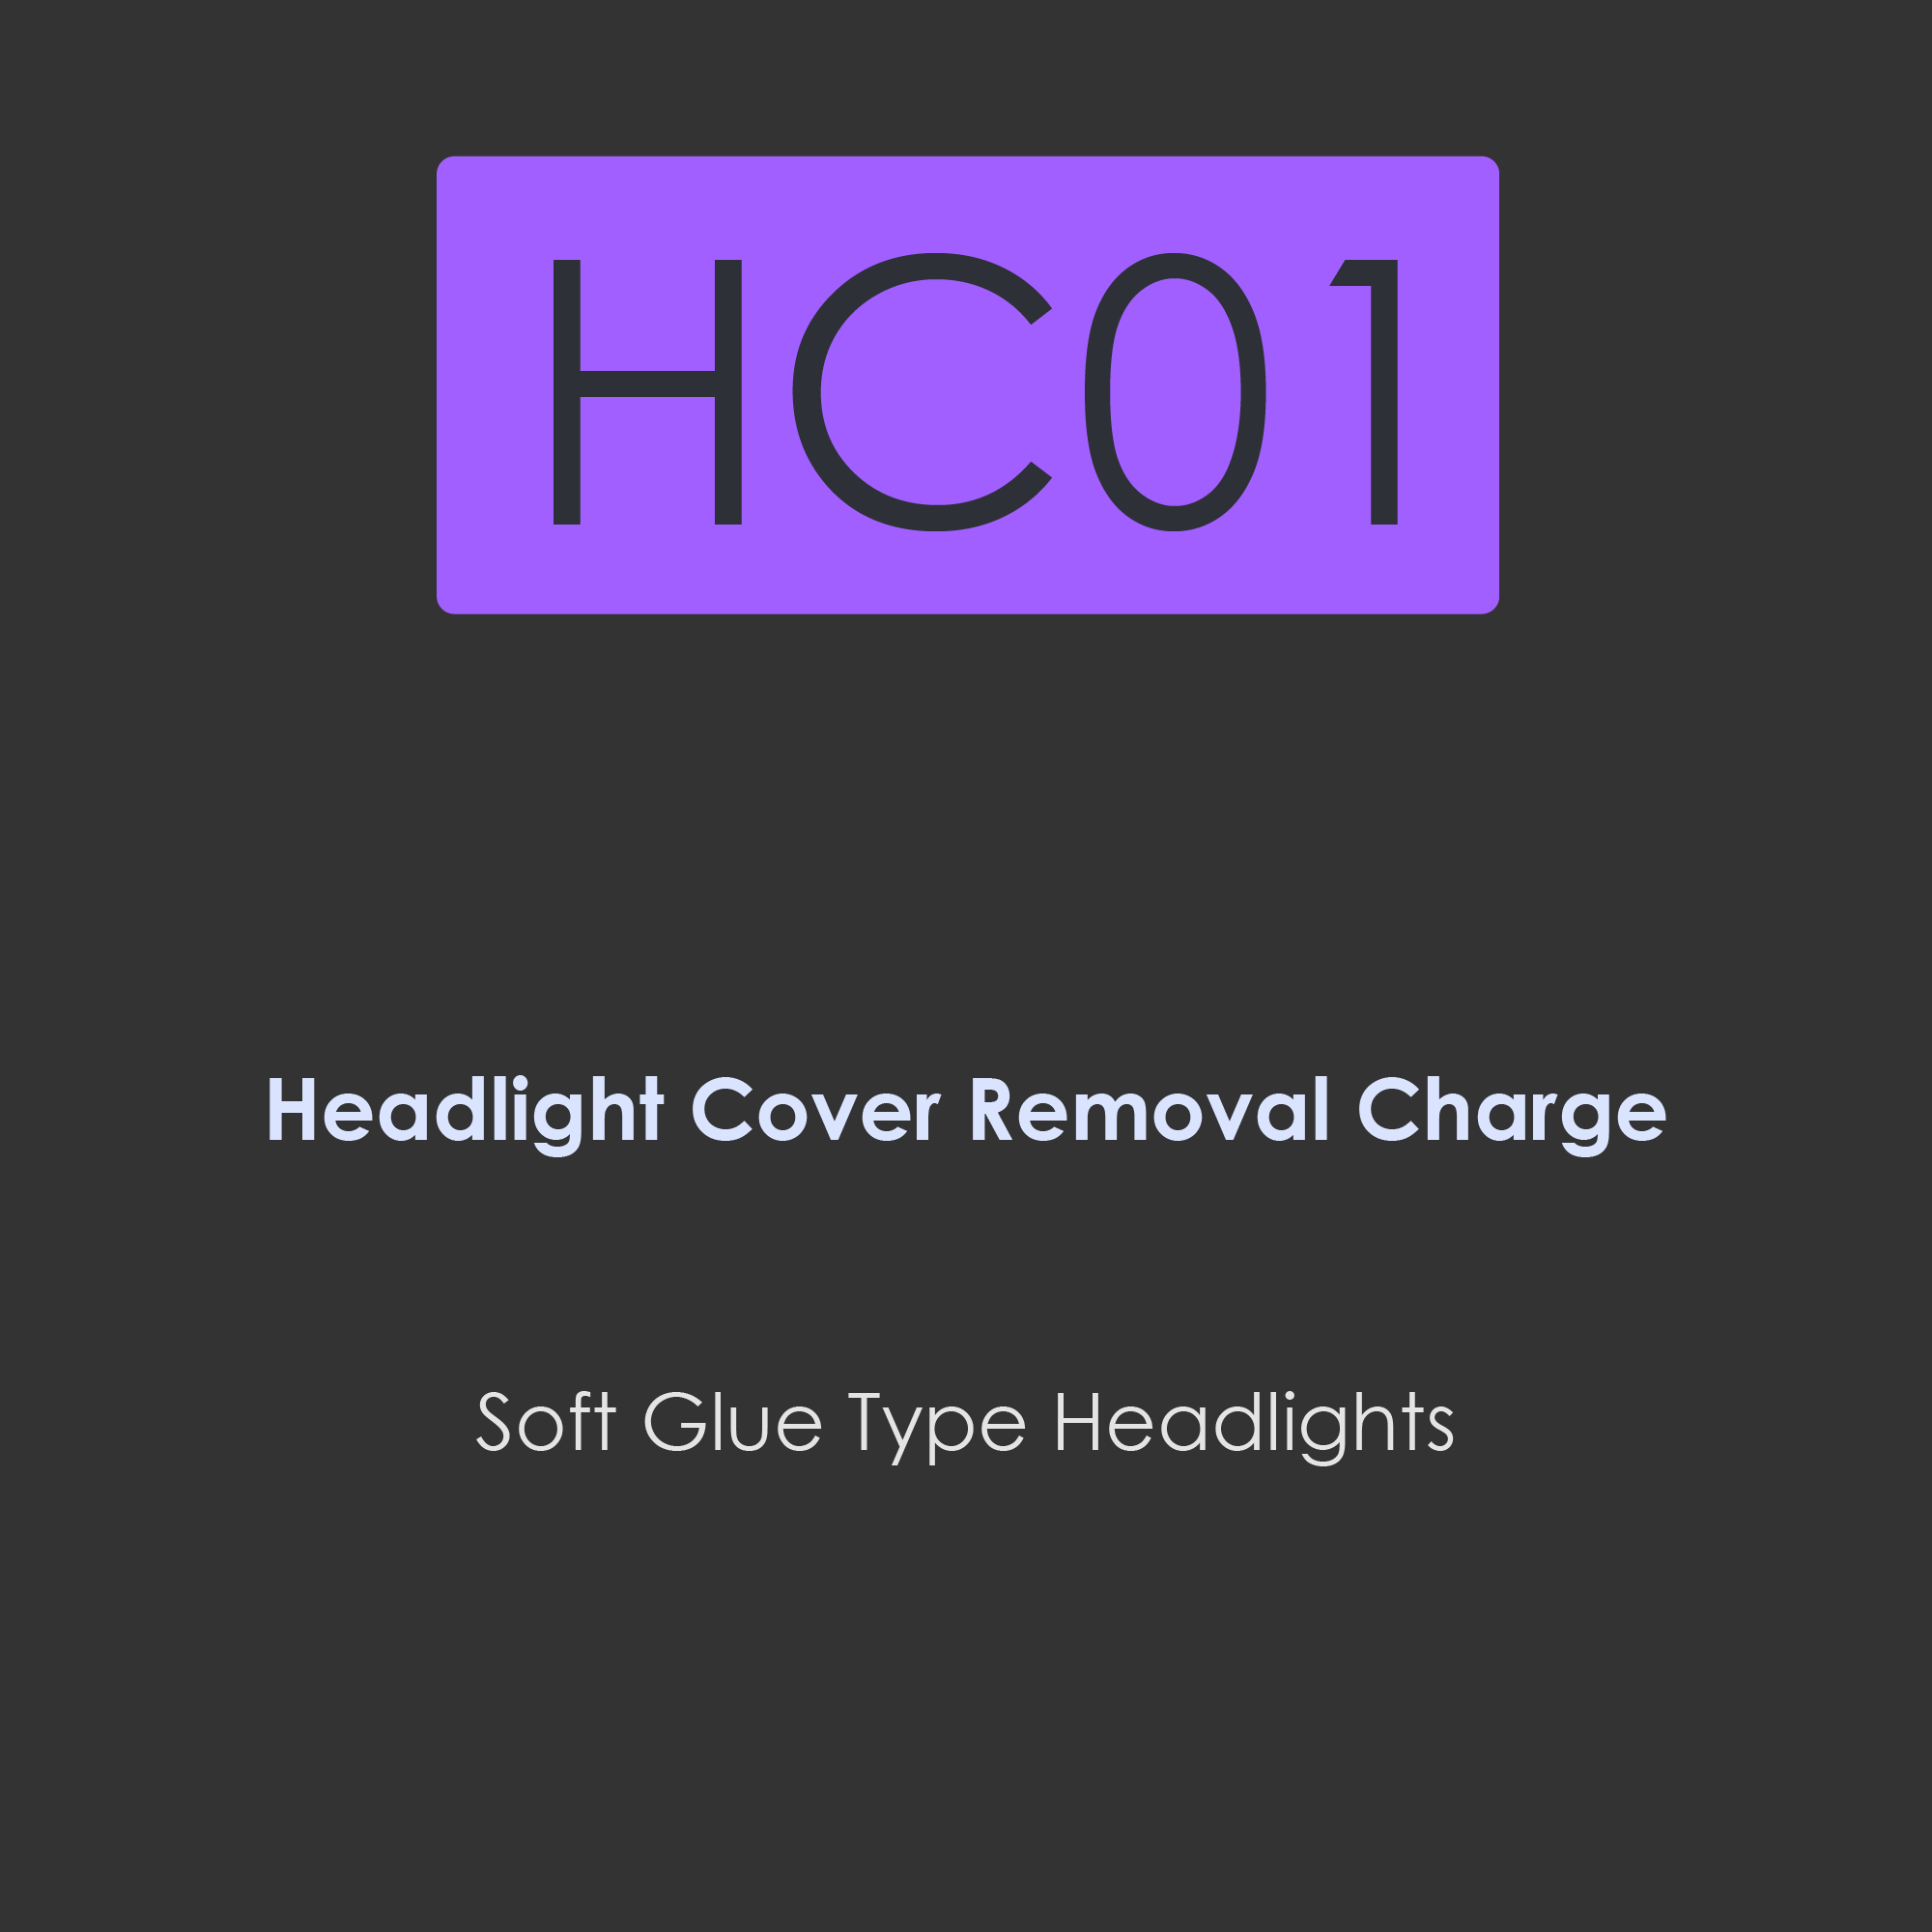 HC01-headlight cover removal charge for soft glue type headlights